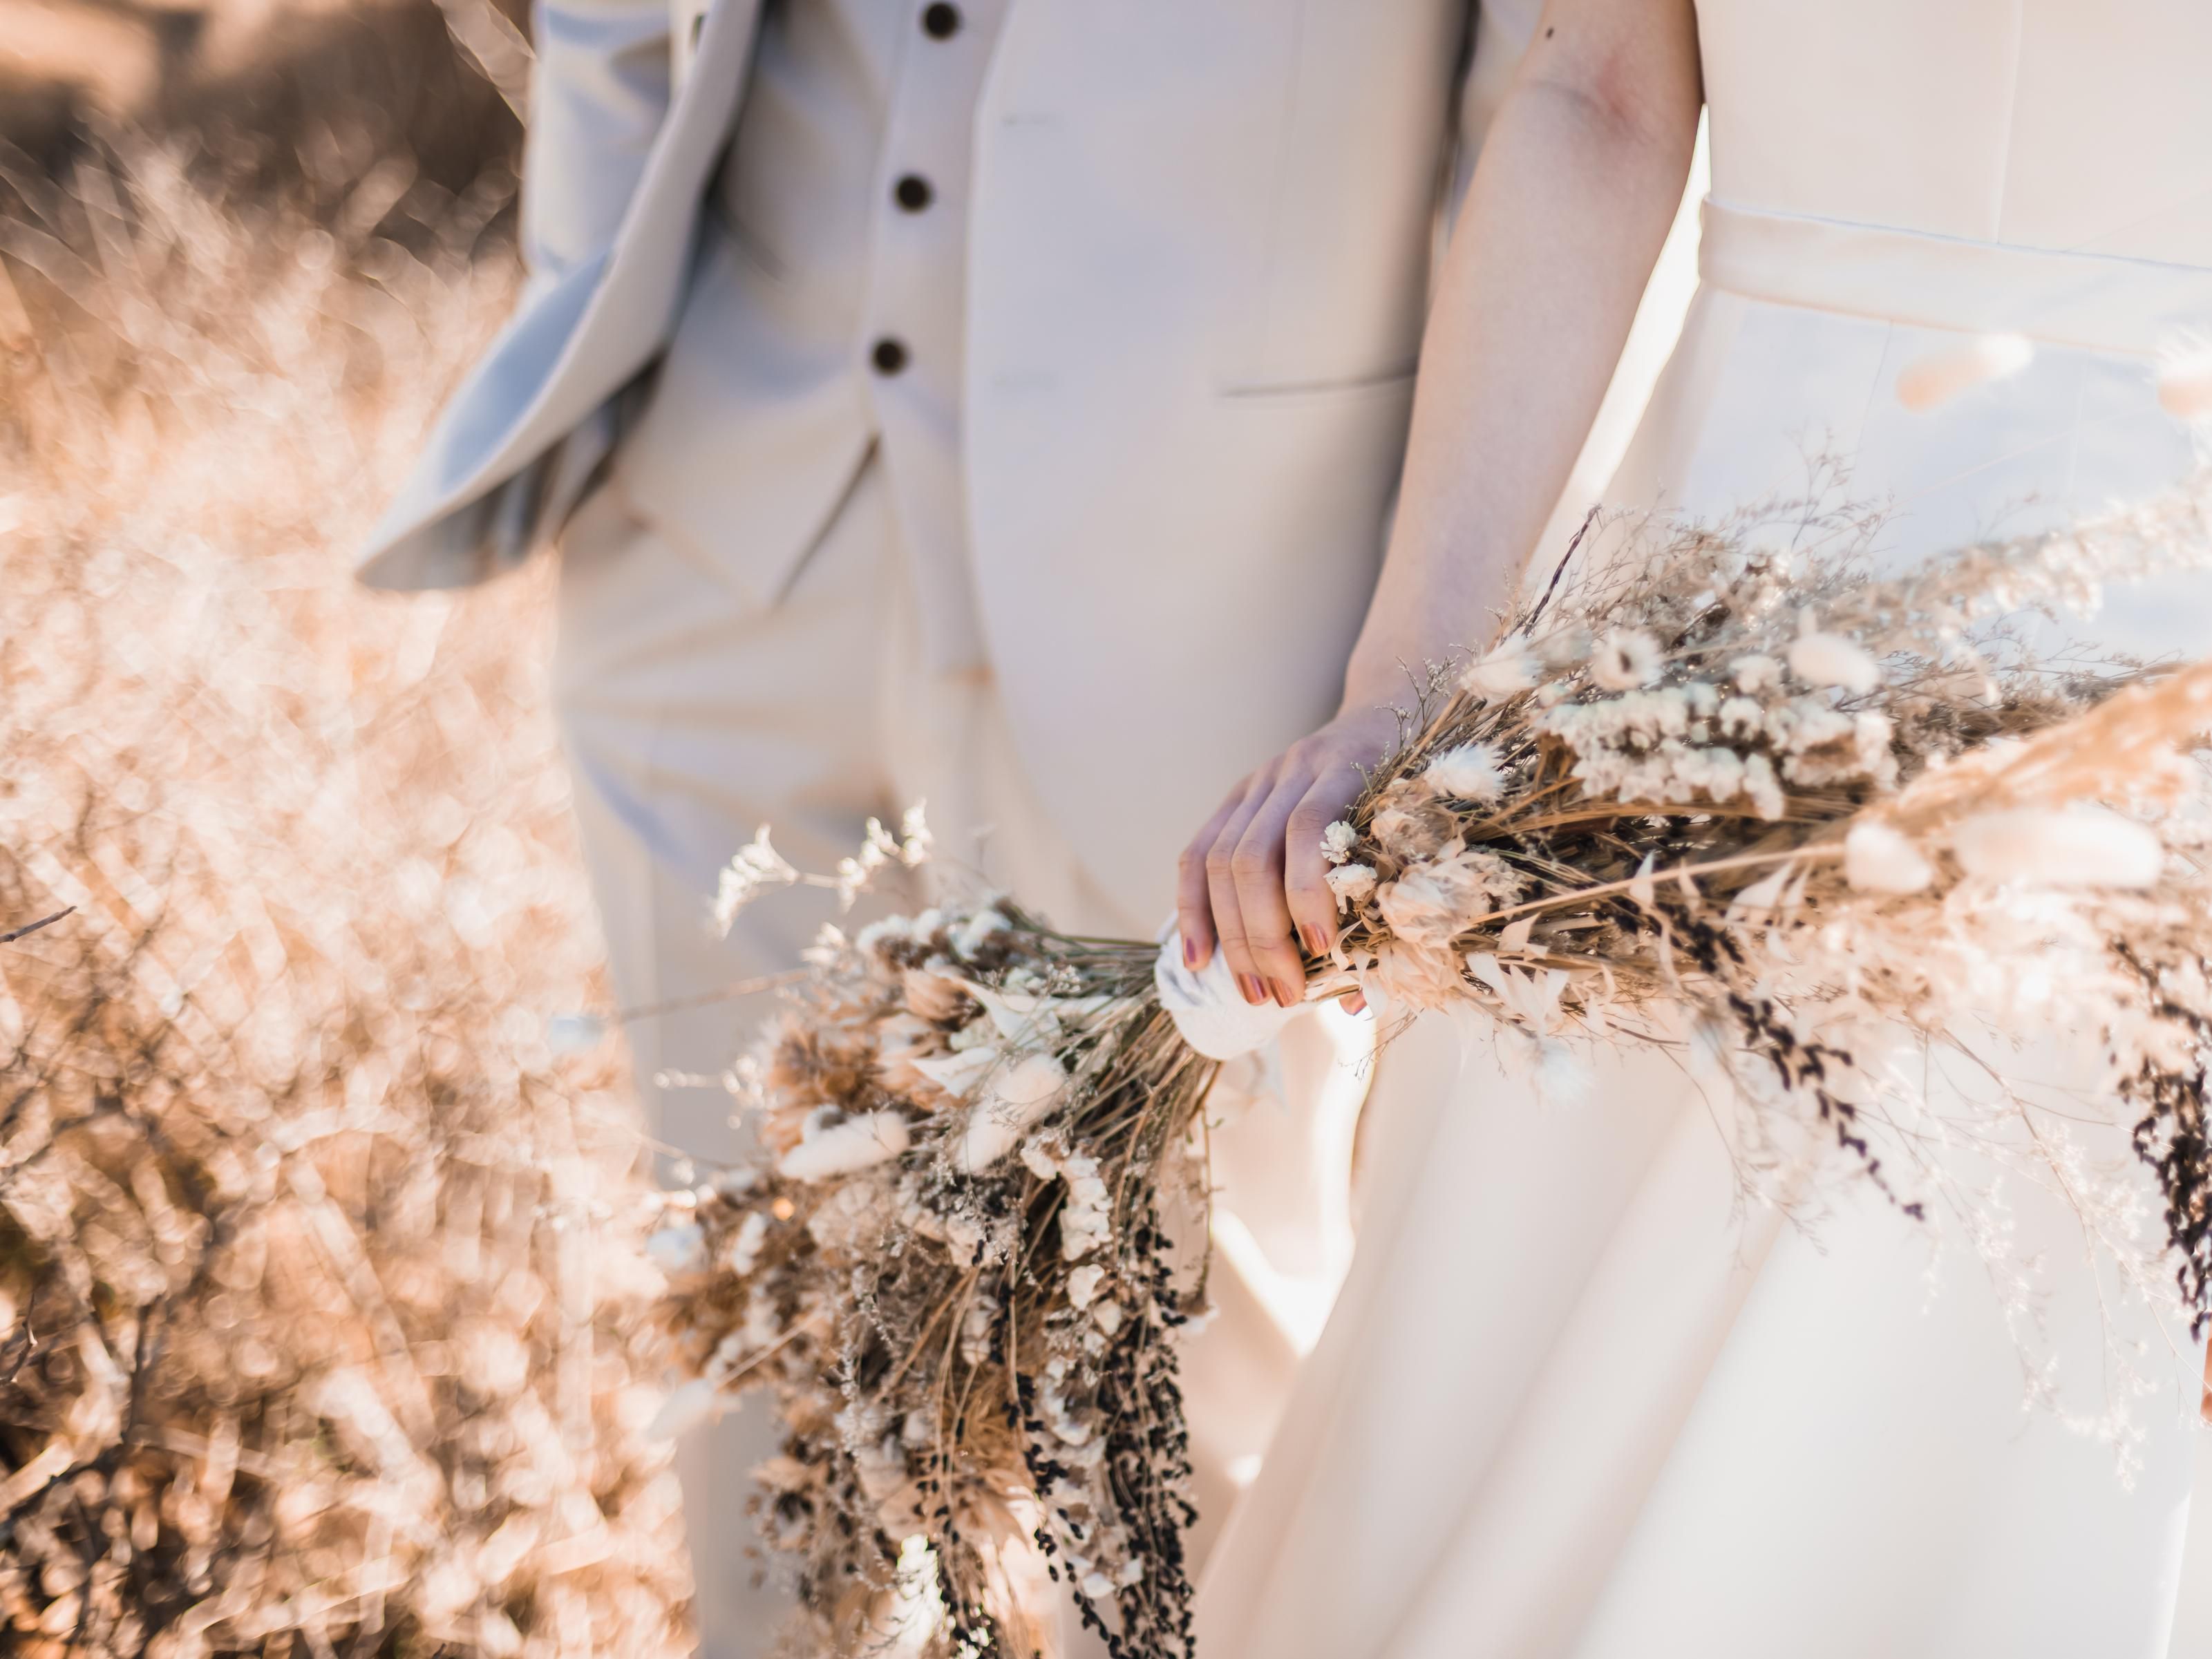 Celebrate the beginning of your life together.
We welcome you on the most special day of your life and offer a variety of wedding venues and cuisine to suit your preferences. Our experienced wedding staff will support you every step of the way.